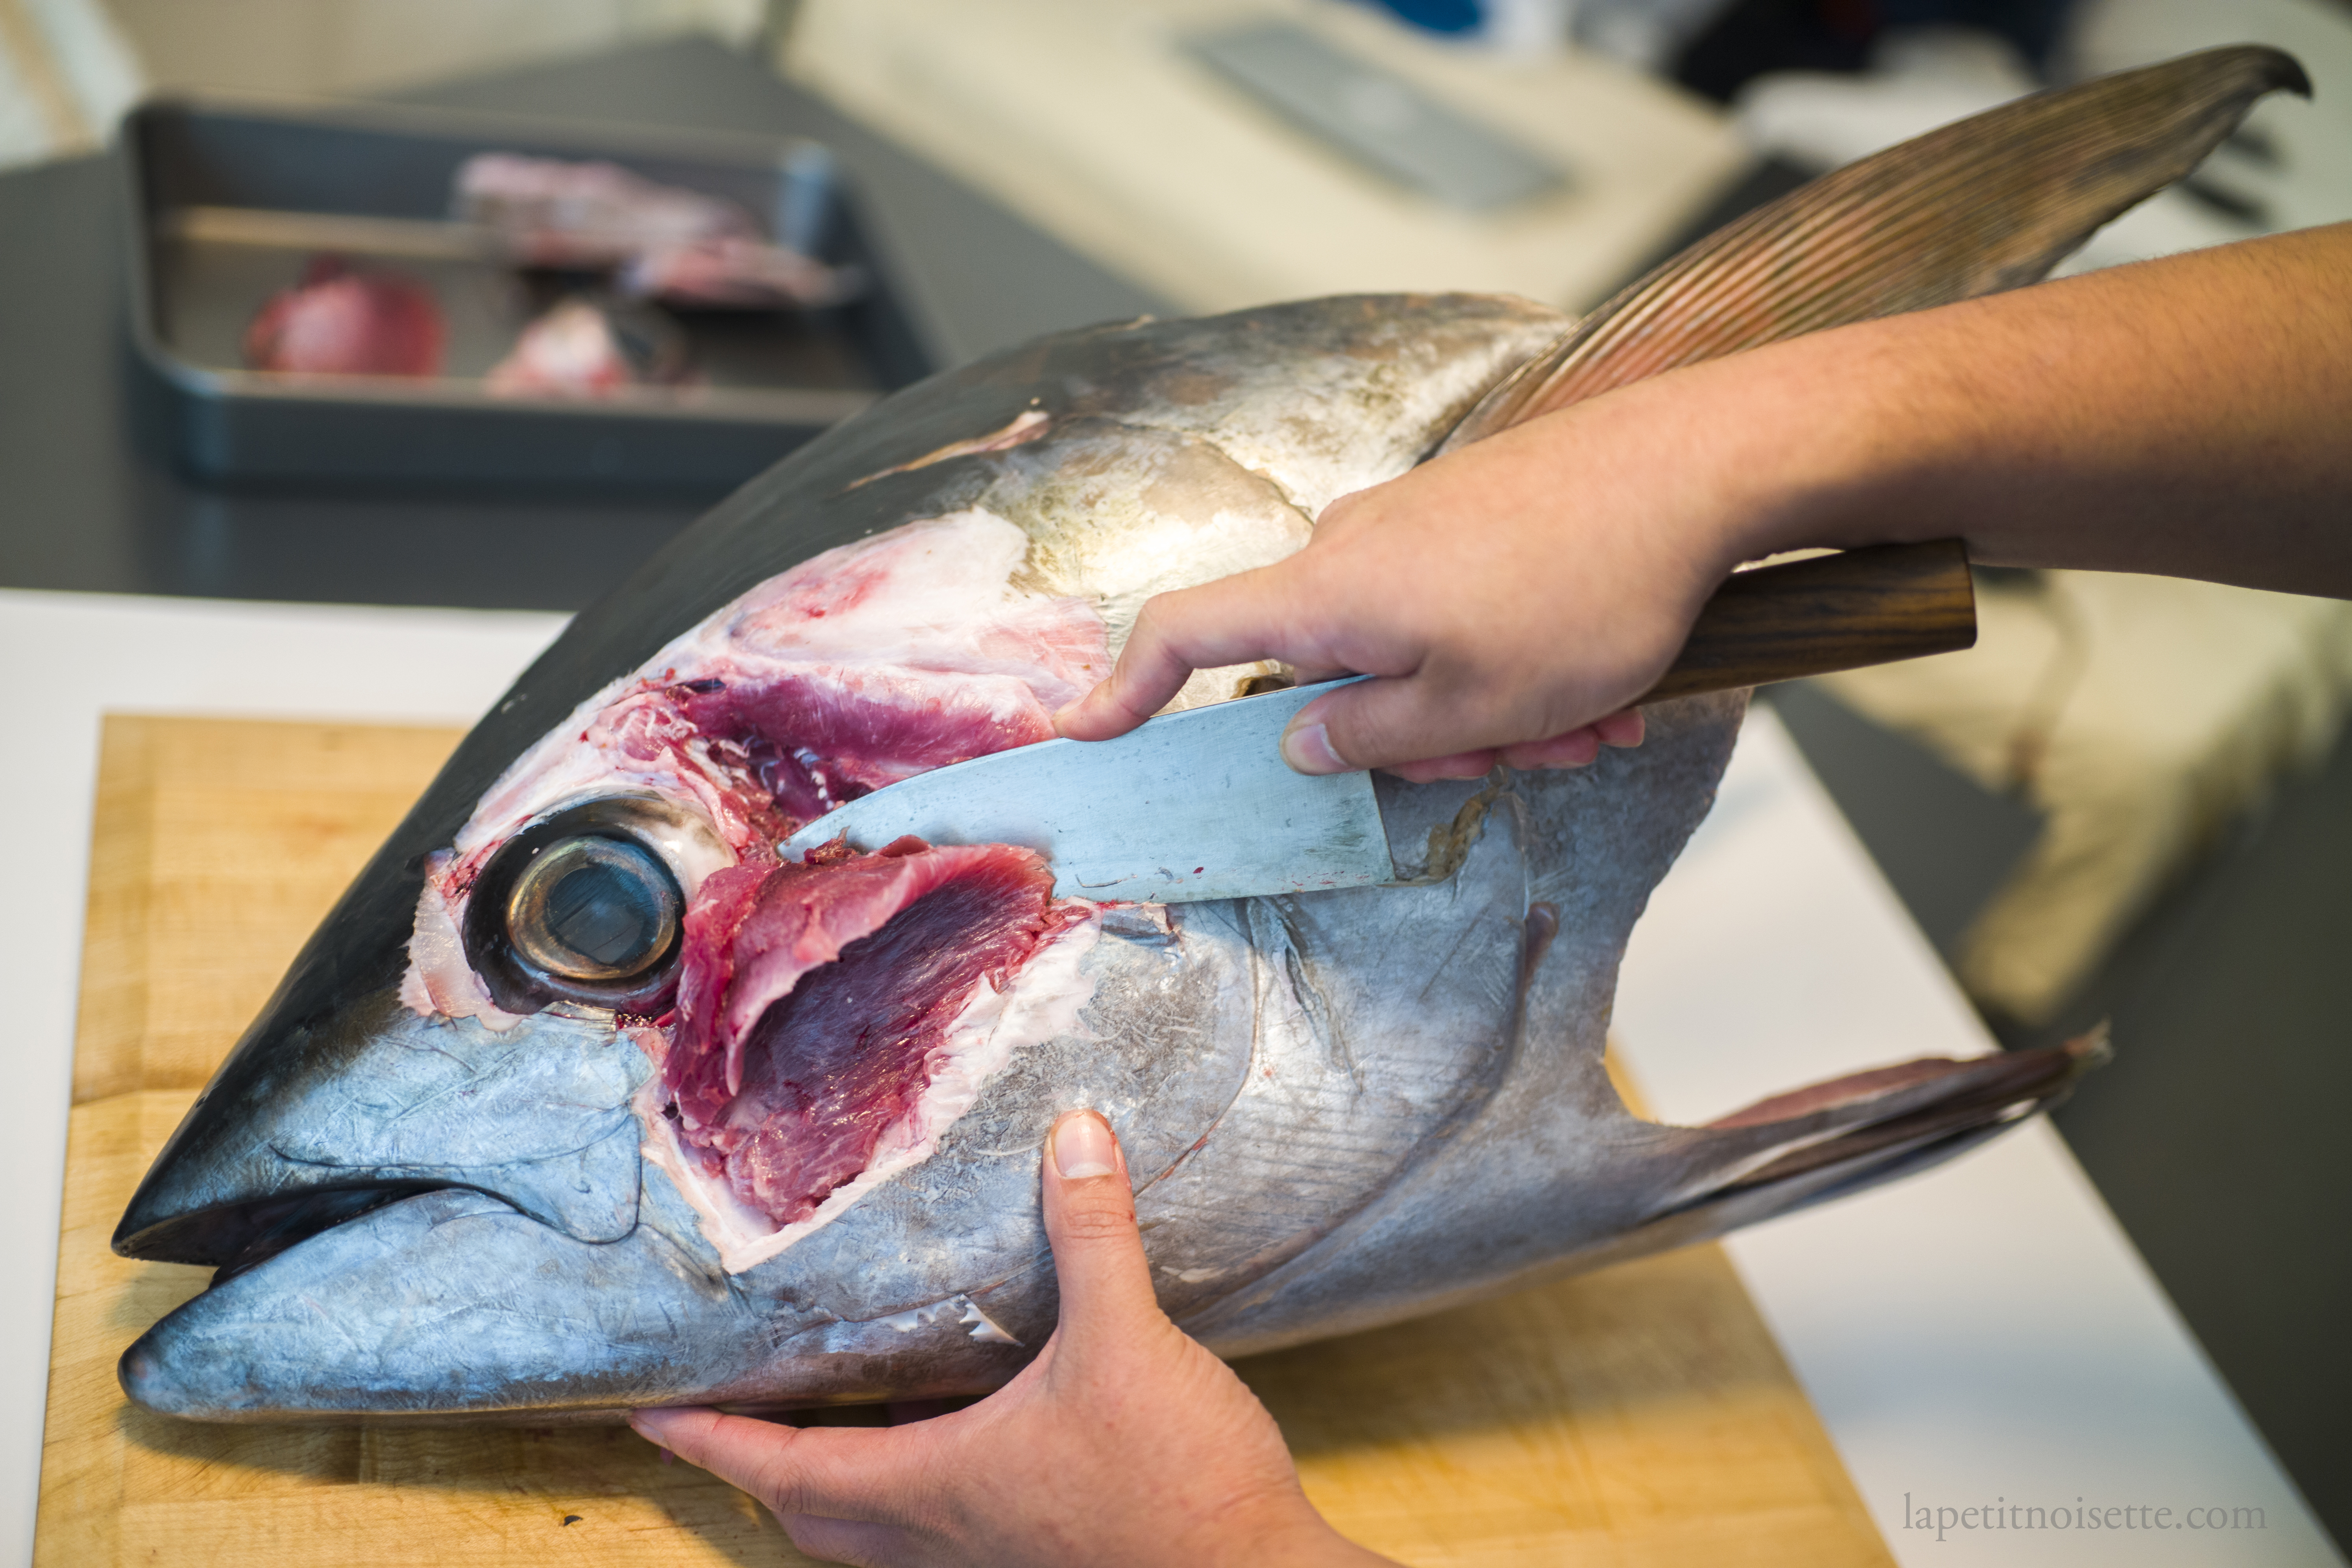 Cutting out the cheek meat from a tuna head.